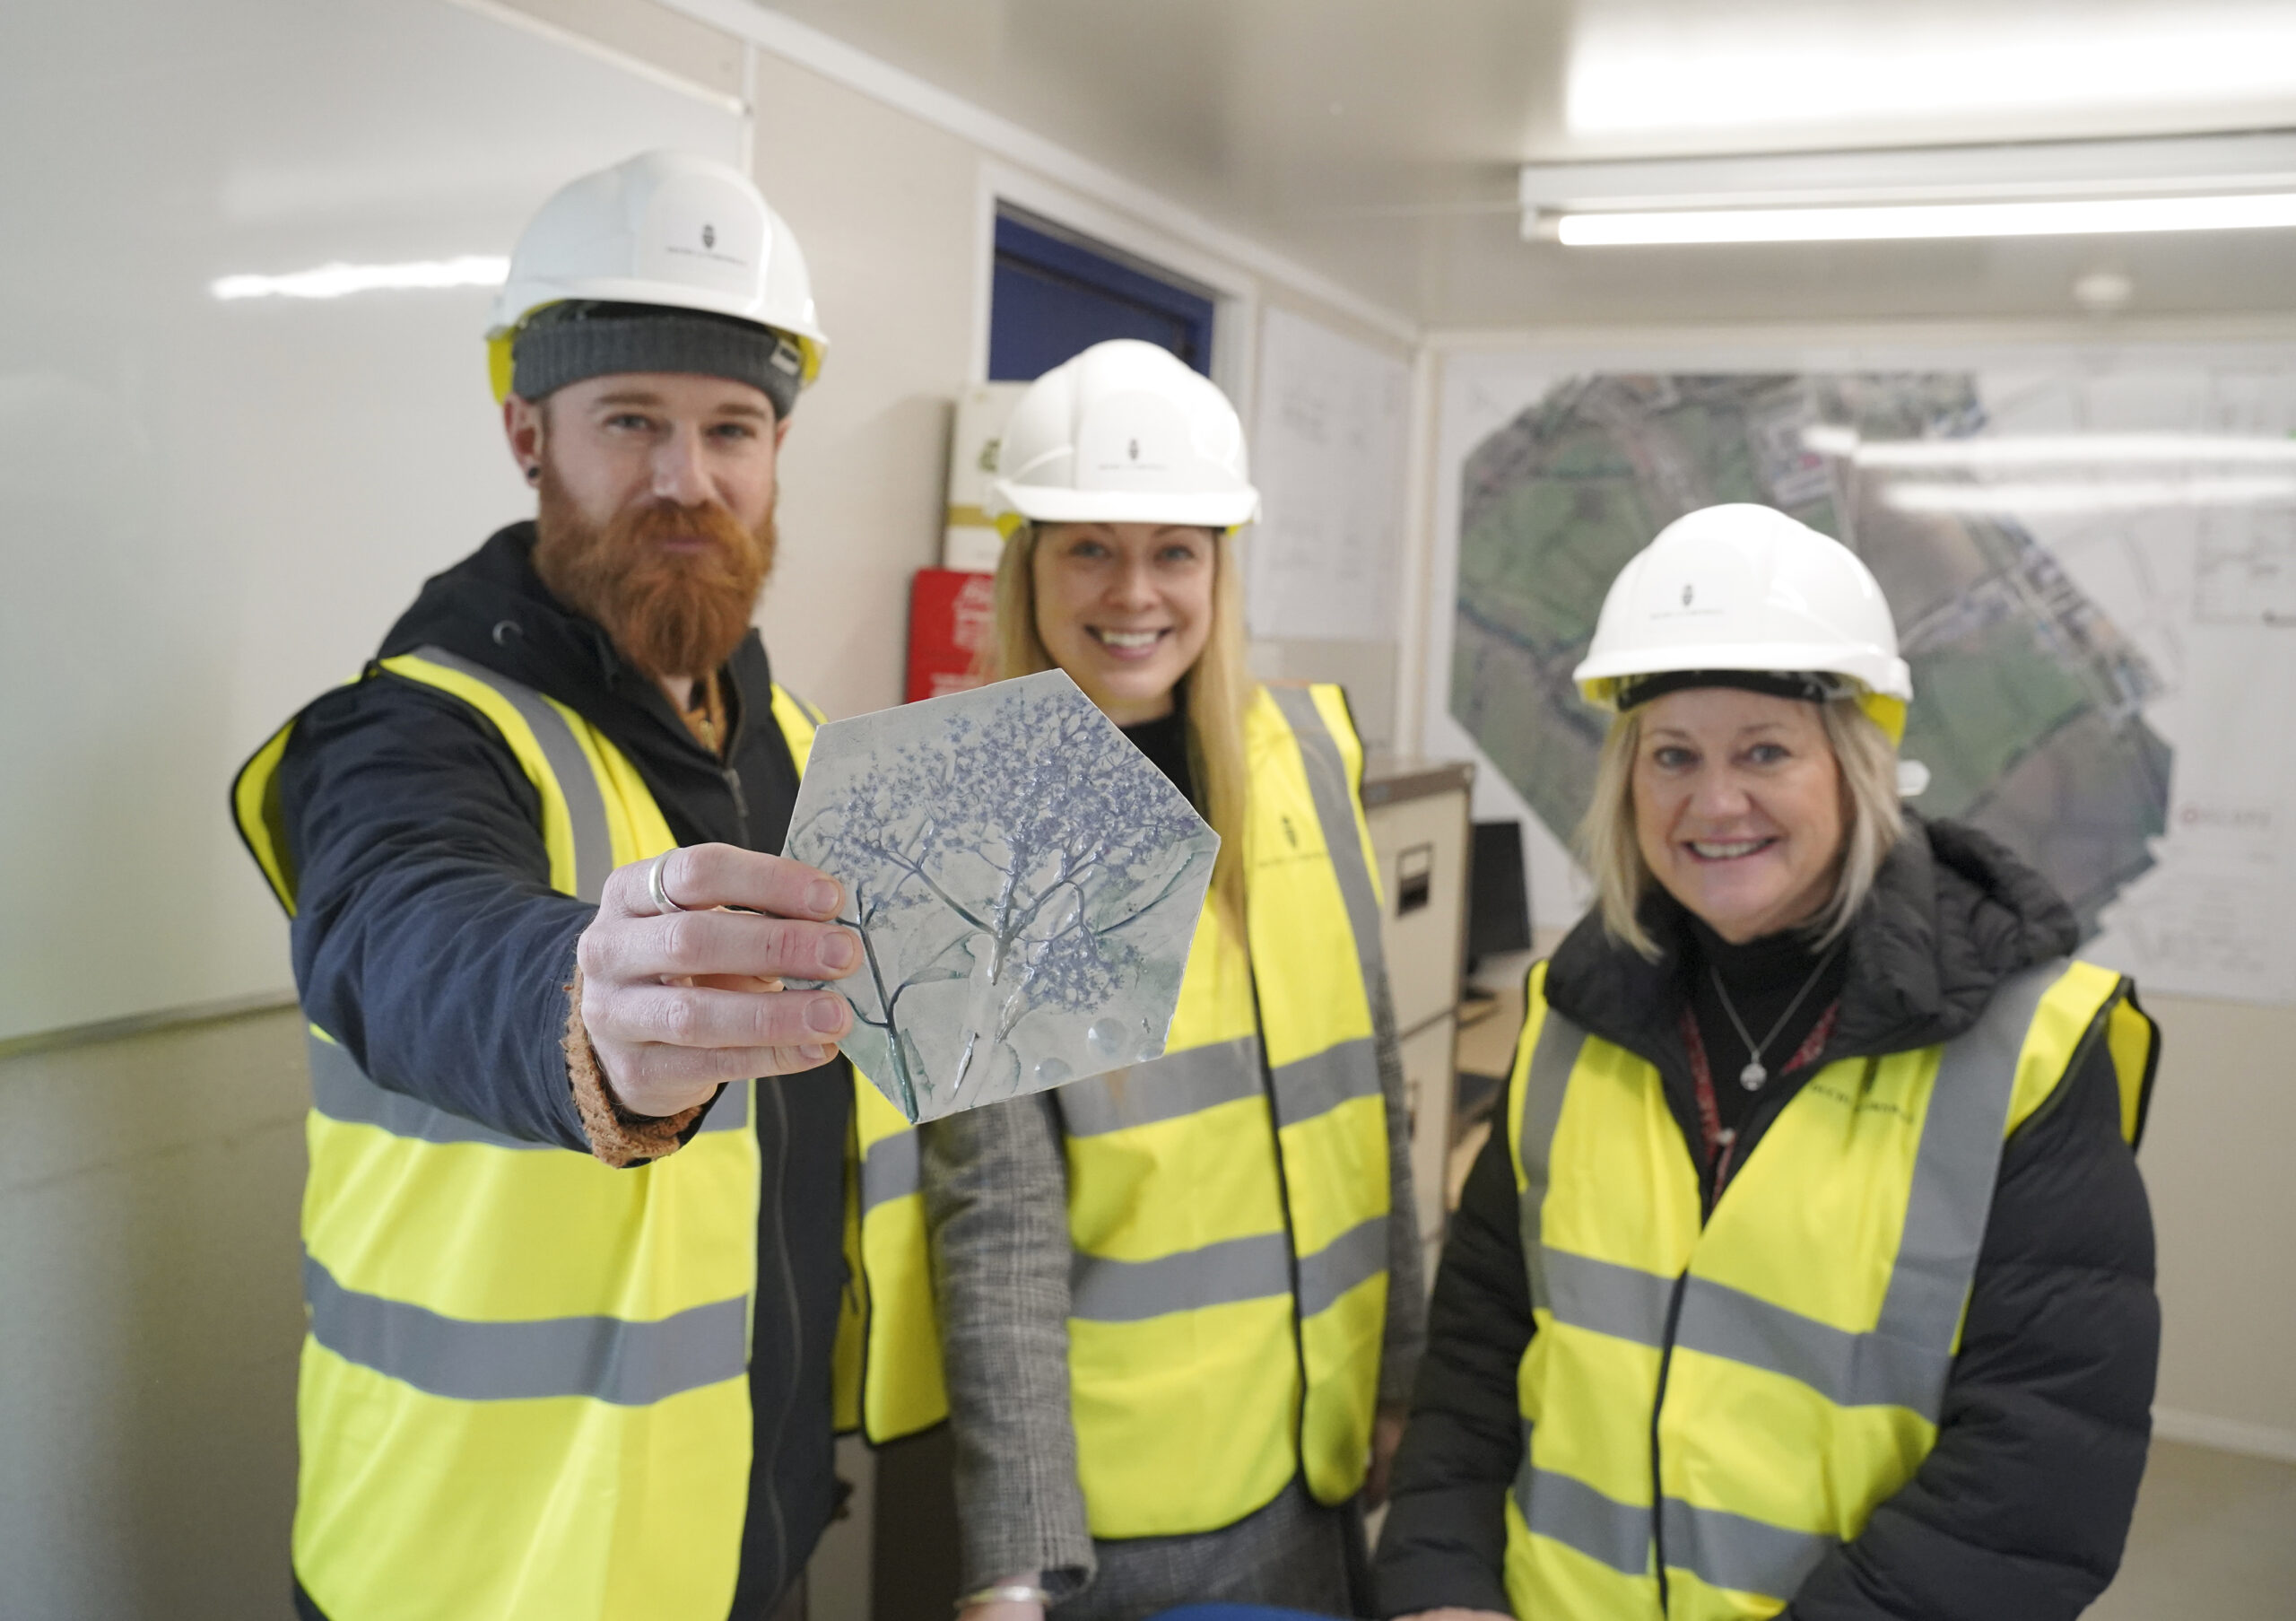 Tom Richardson, director; Sarah Hood, senior manager; Mandy Richardson, managing director of Naturally Learning with some of the tiles made by local families for Nansledan's new nursery.